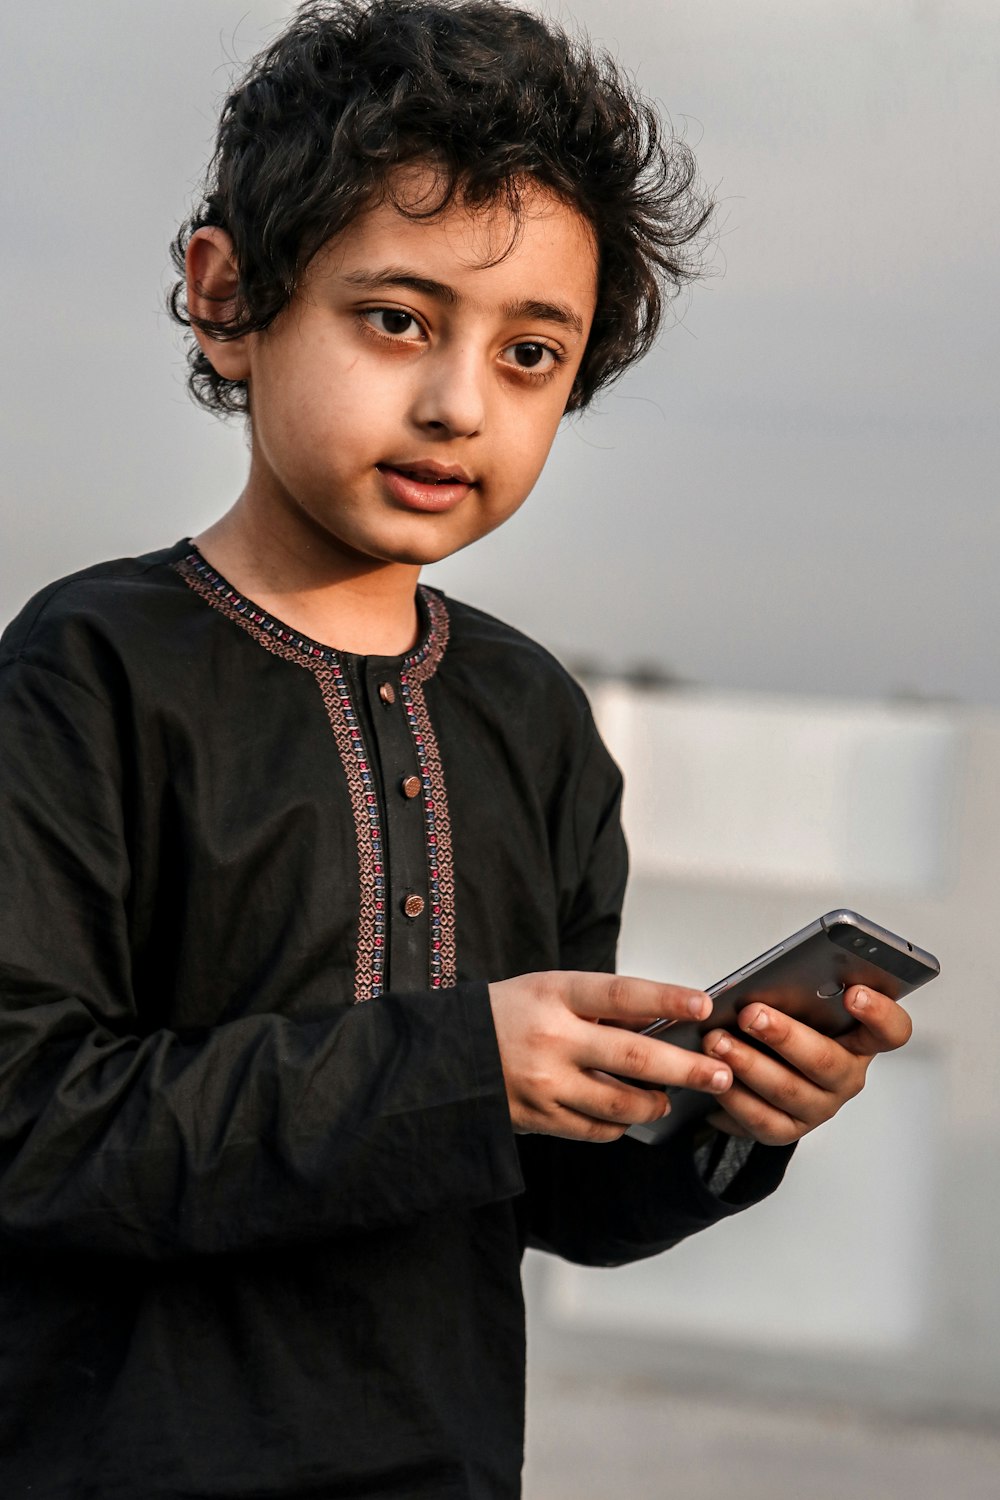 a young boy holding a smart phone in his hands